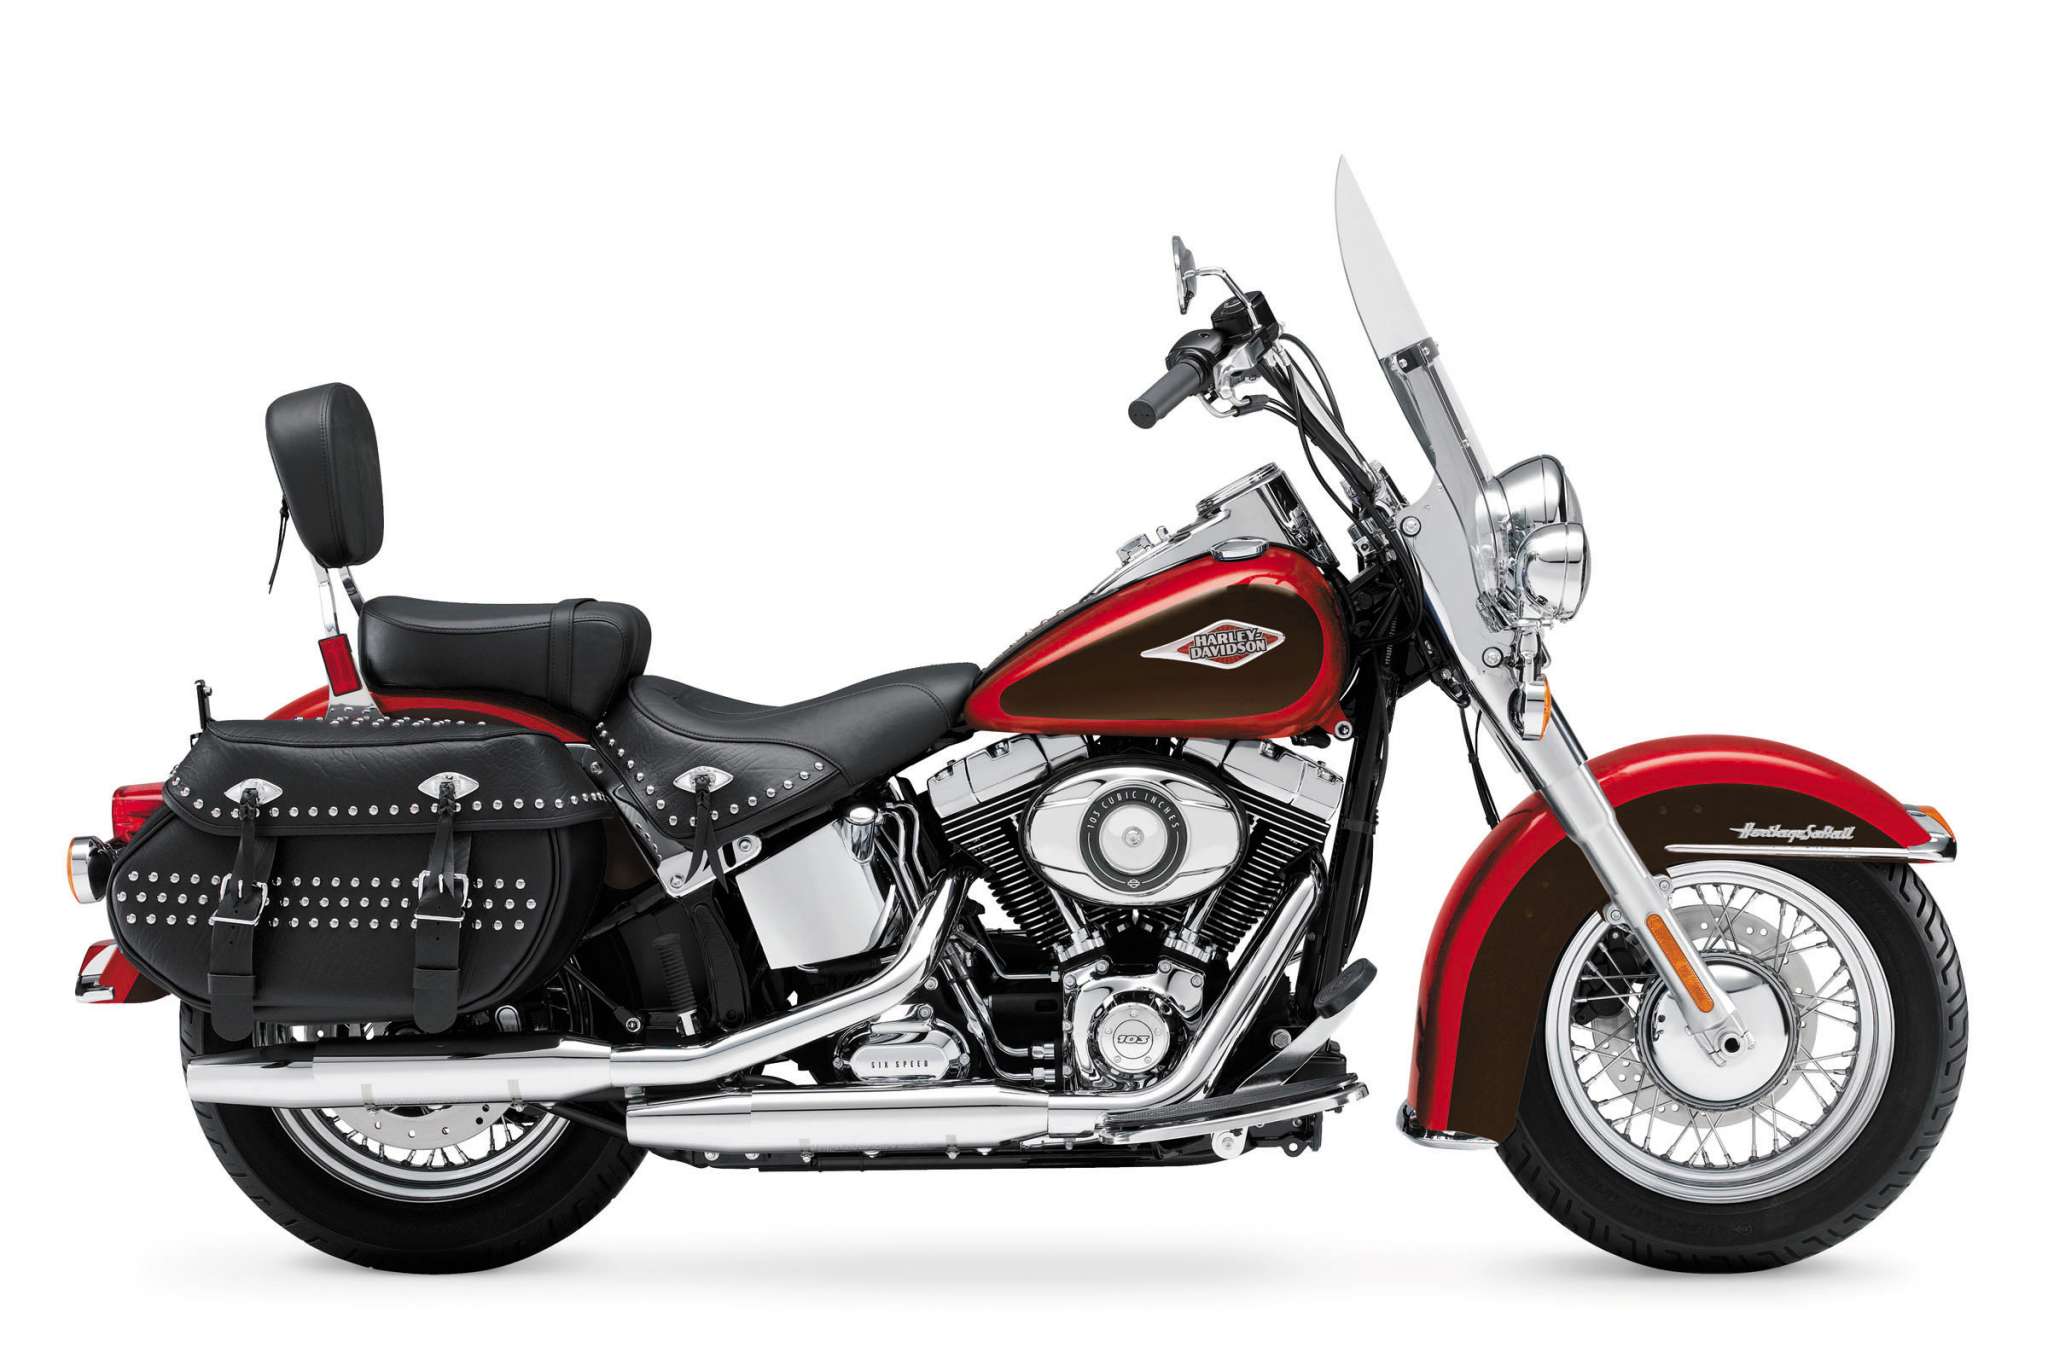 2013 Harley Davidson Flstc Heritage Softail Classic Peace Officer Review